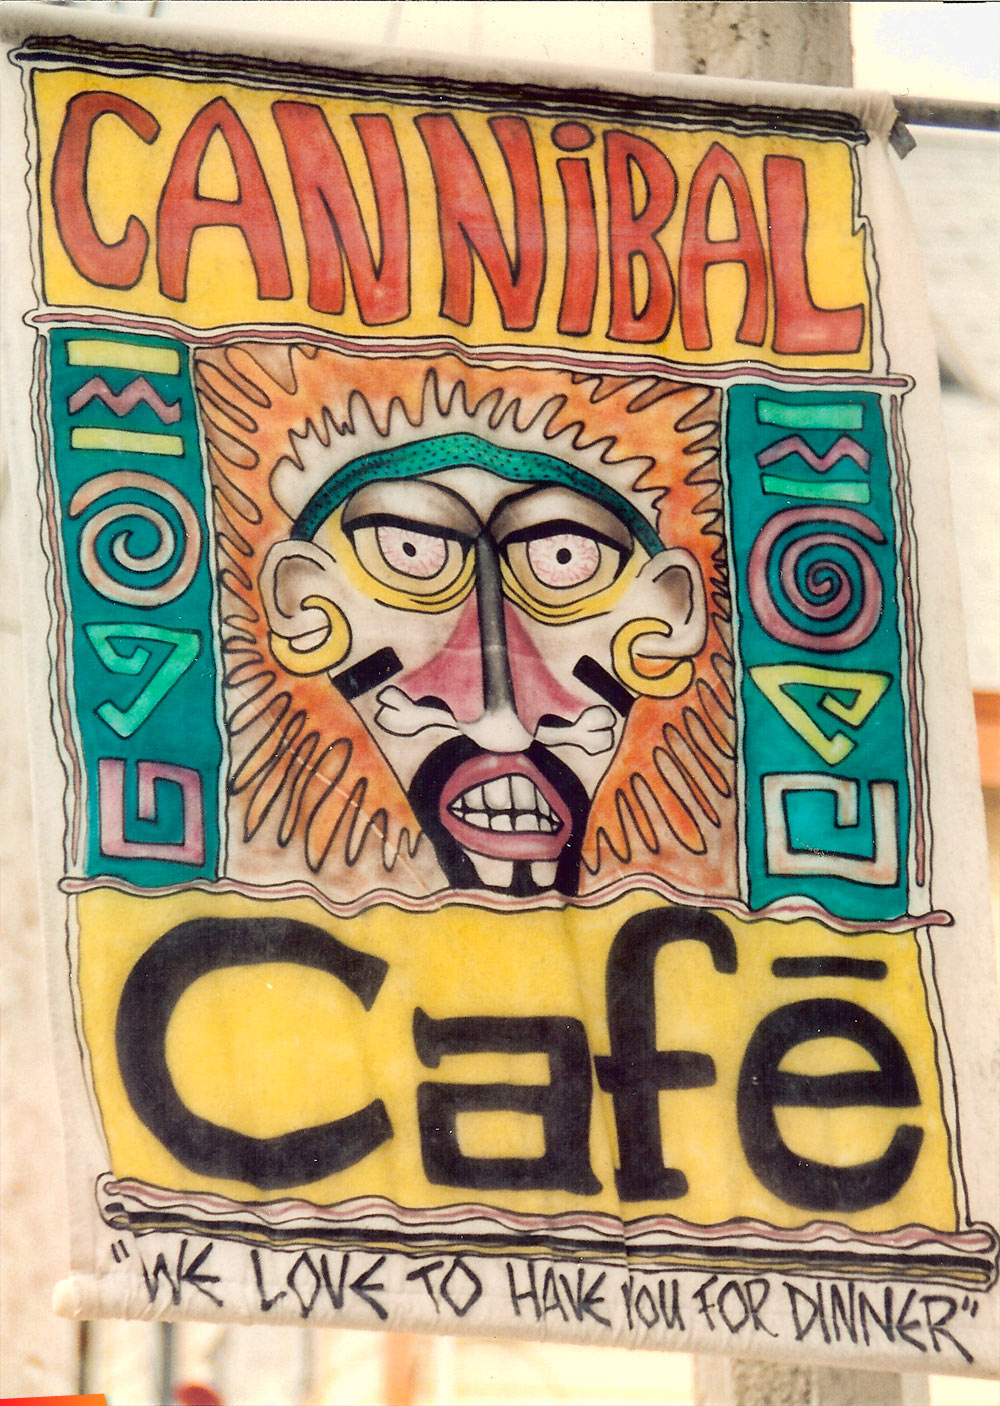 Sign at Cannibal Cafe, 1996